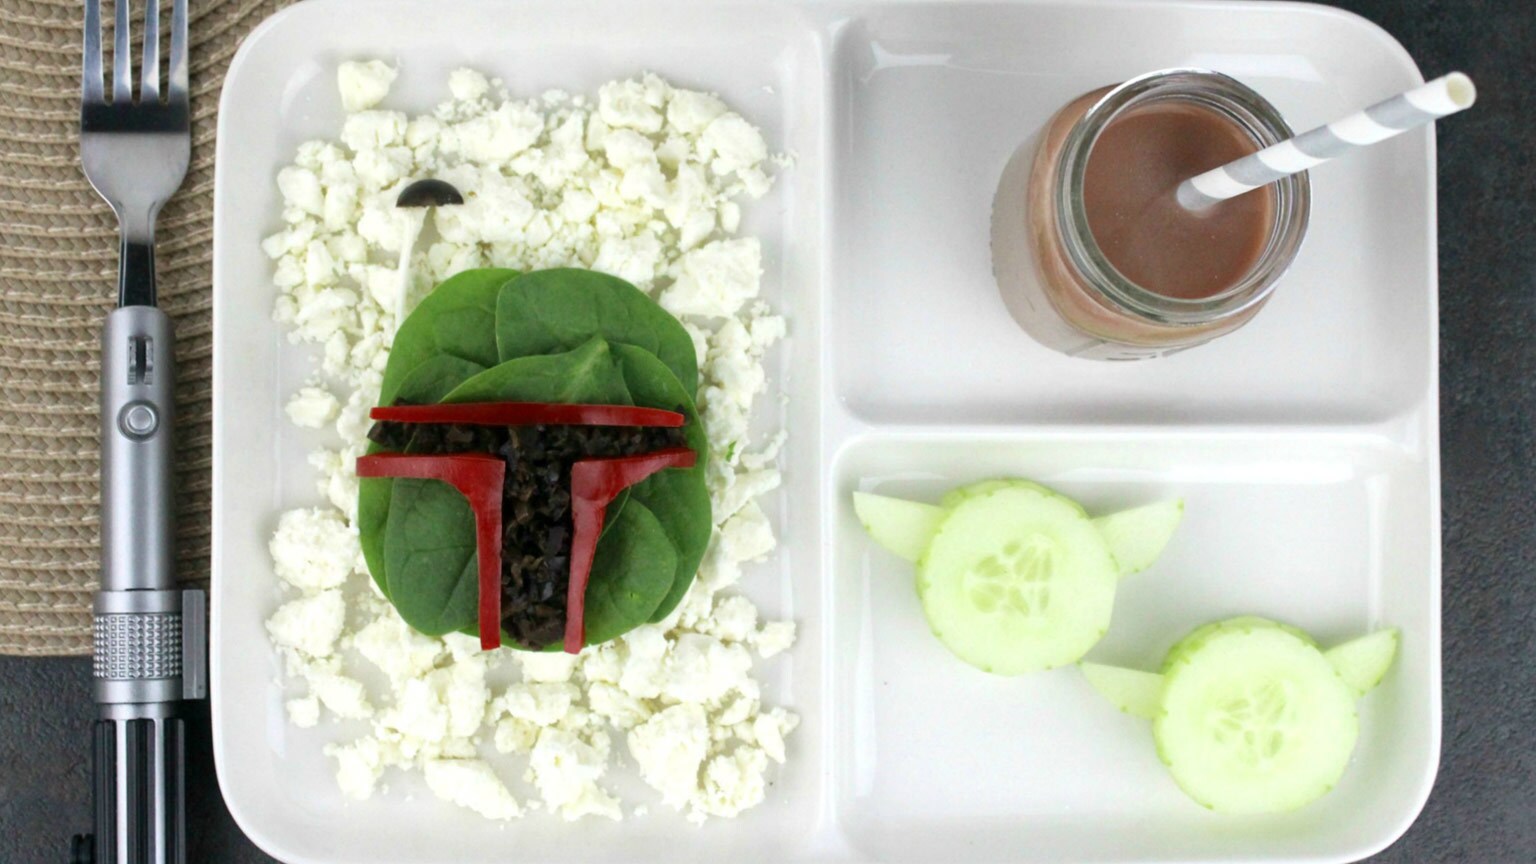 Empire at 40 | Make Boba “Feta” Salad for a Most Impressive Dinner and Movie Night